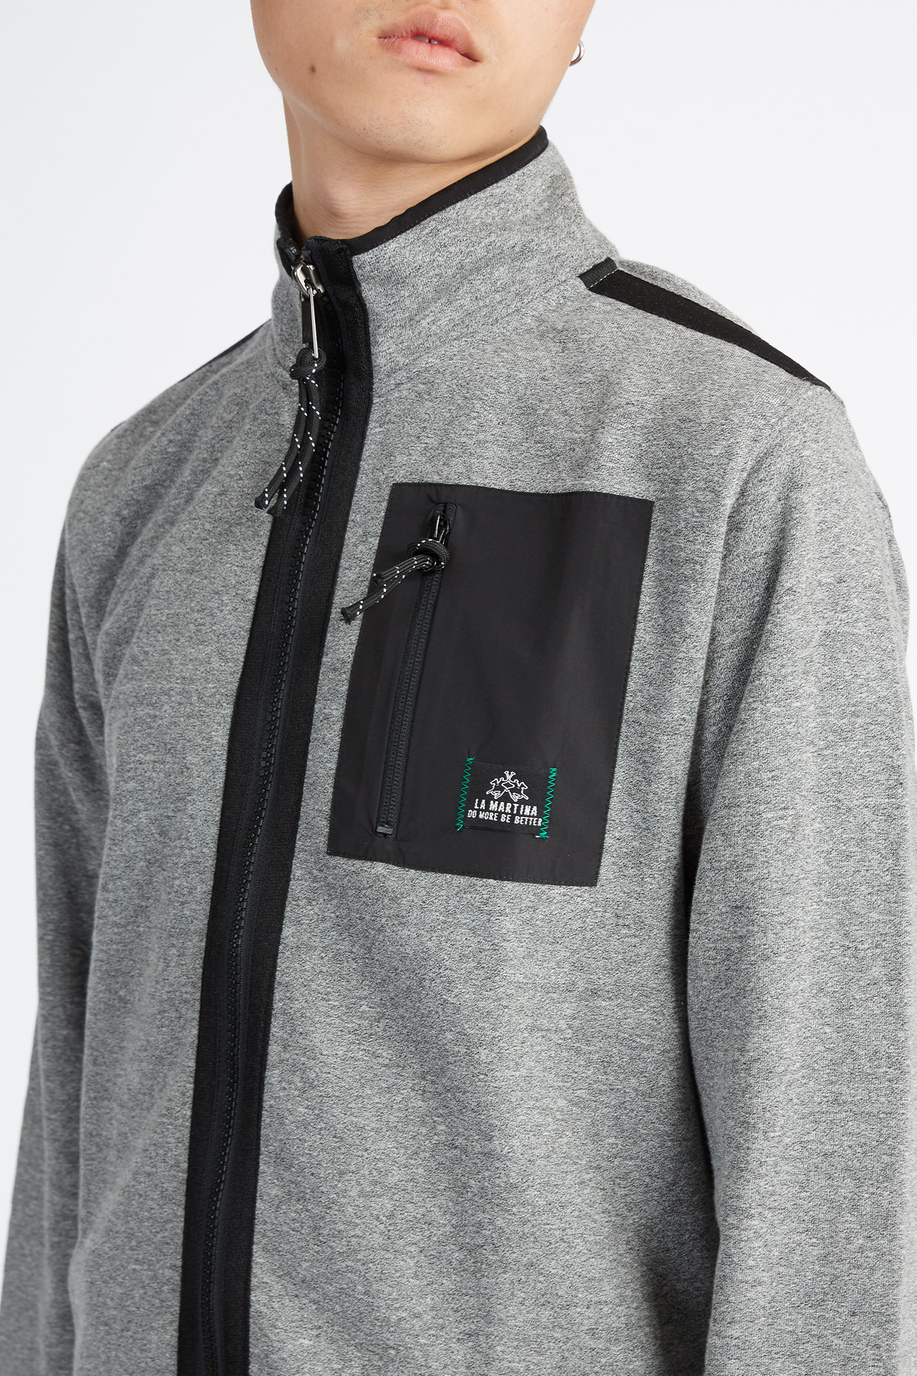 Men's two-tone capsule sweatshirt with logos, stand-up collar, full zip and front pocket - Vani - Knitwear & Sweatshirts | La Martina - Official Online Shop